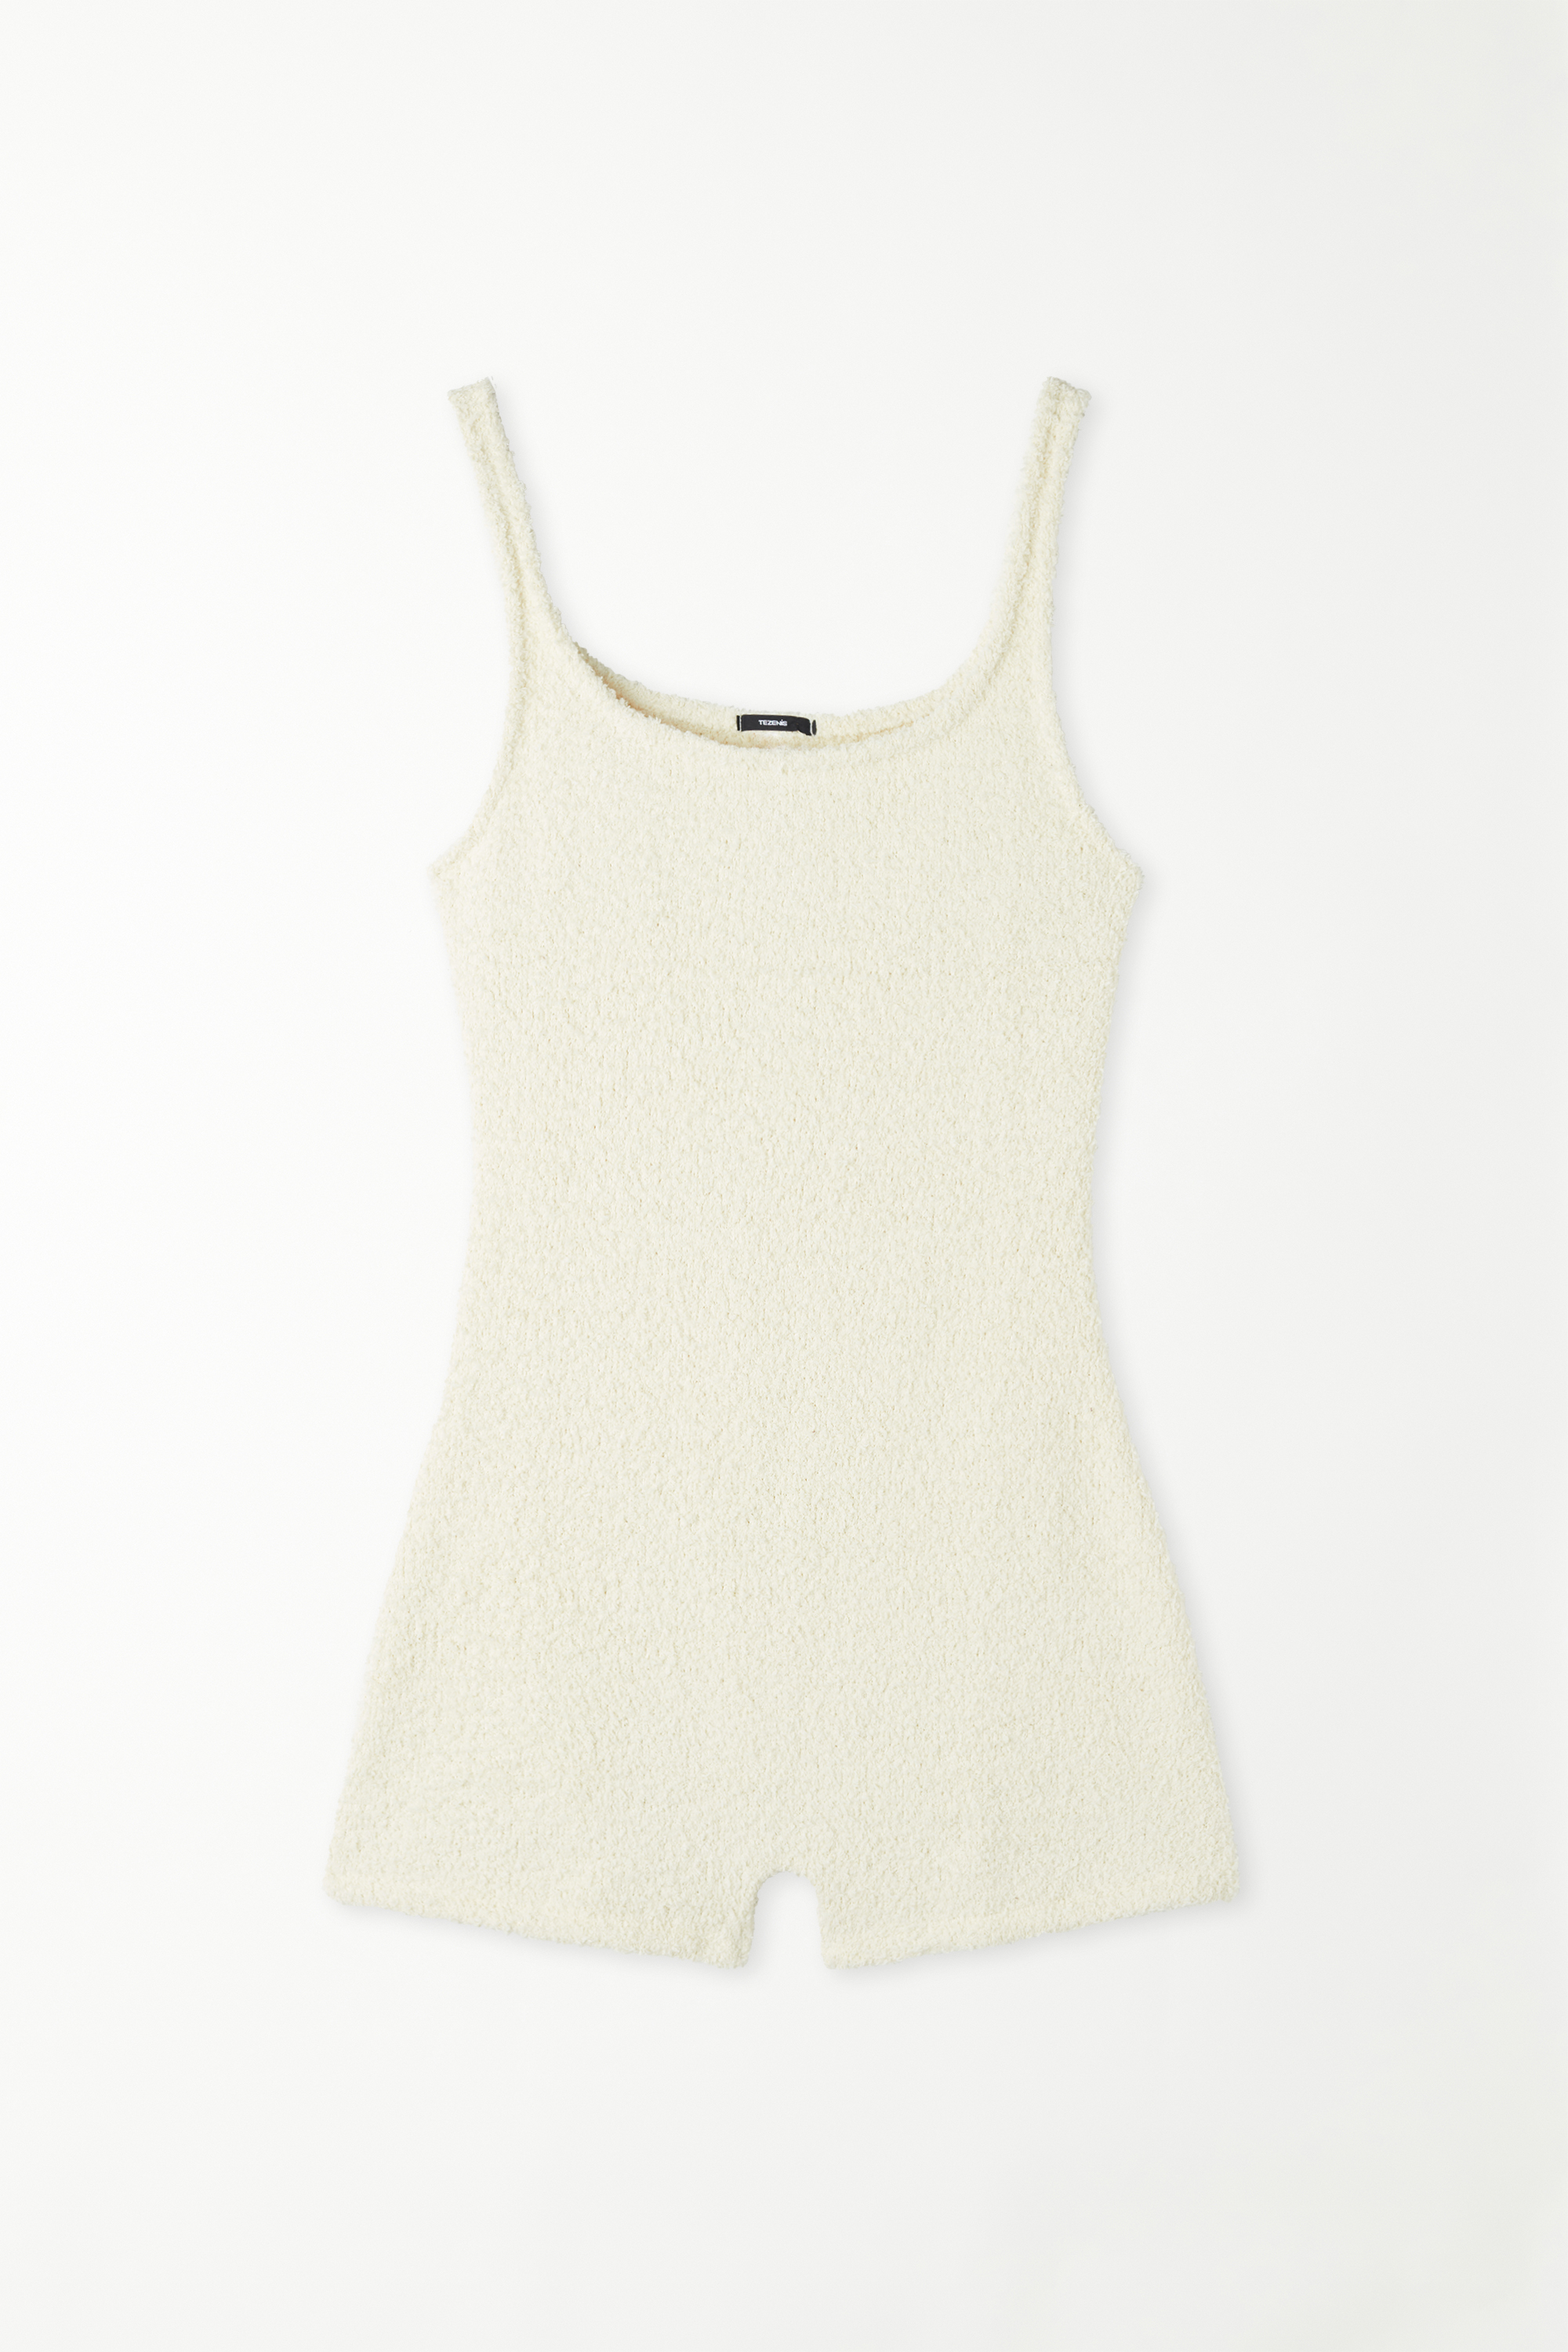 New Teddy Short Playsuit with Thin Shoulder Straps